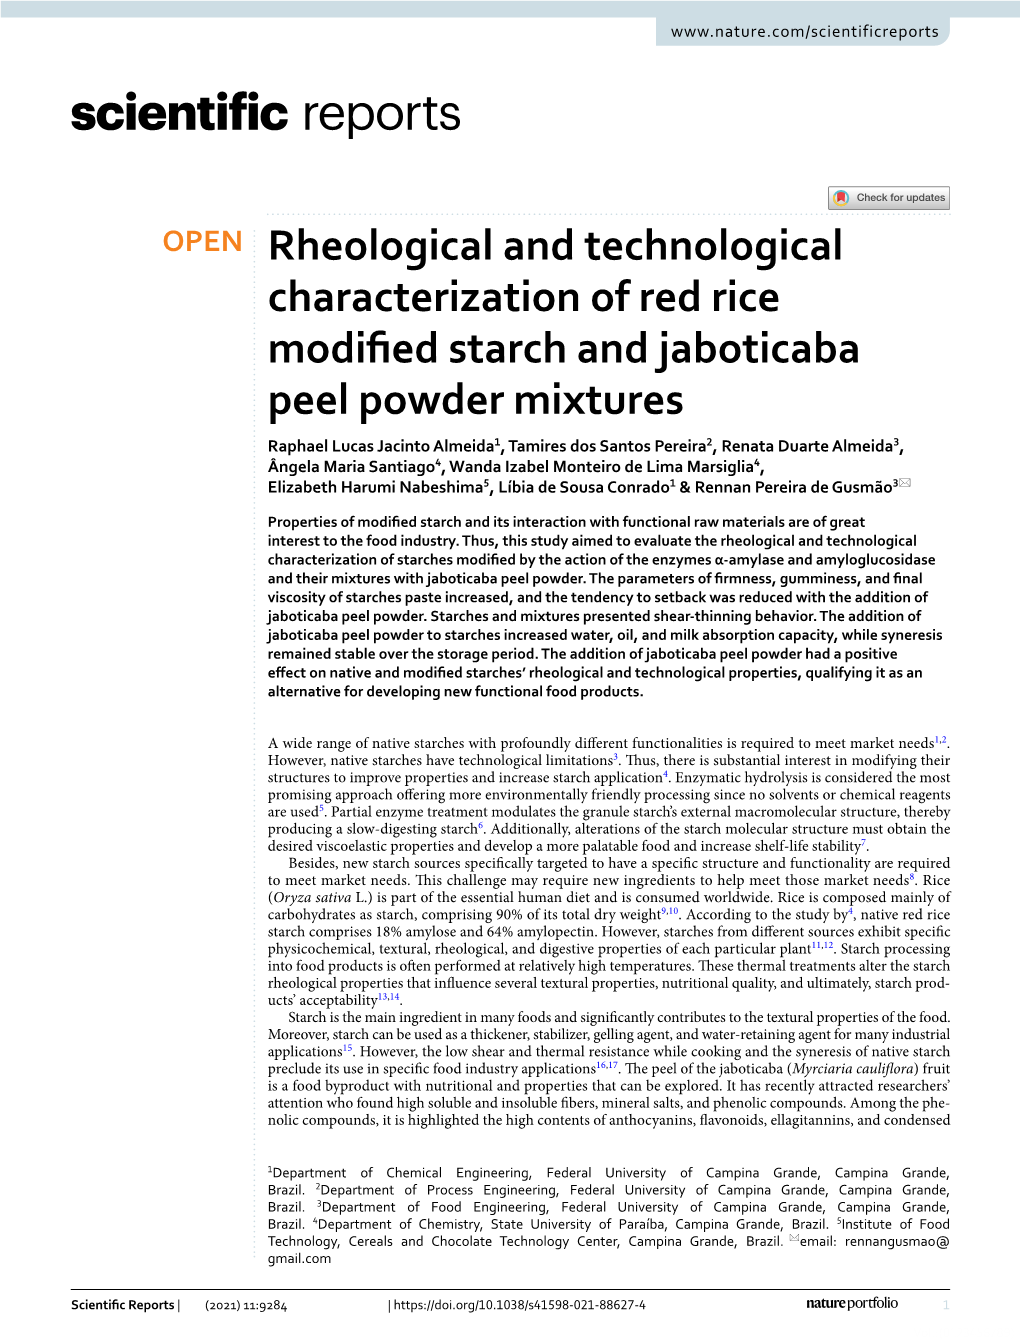 Rheological and Technological Characterization of Red Rice Modified Starch and Jaboticaba Peel Powder Mixtures